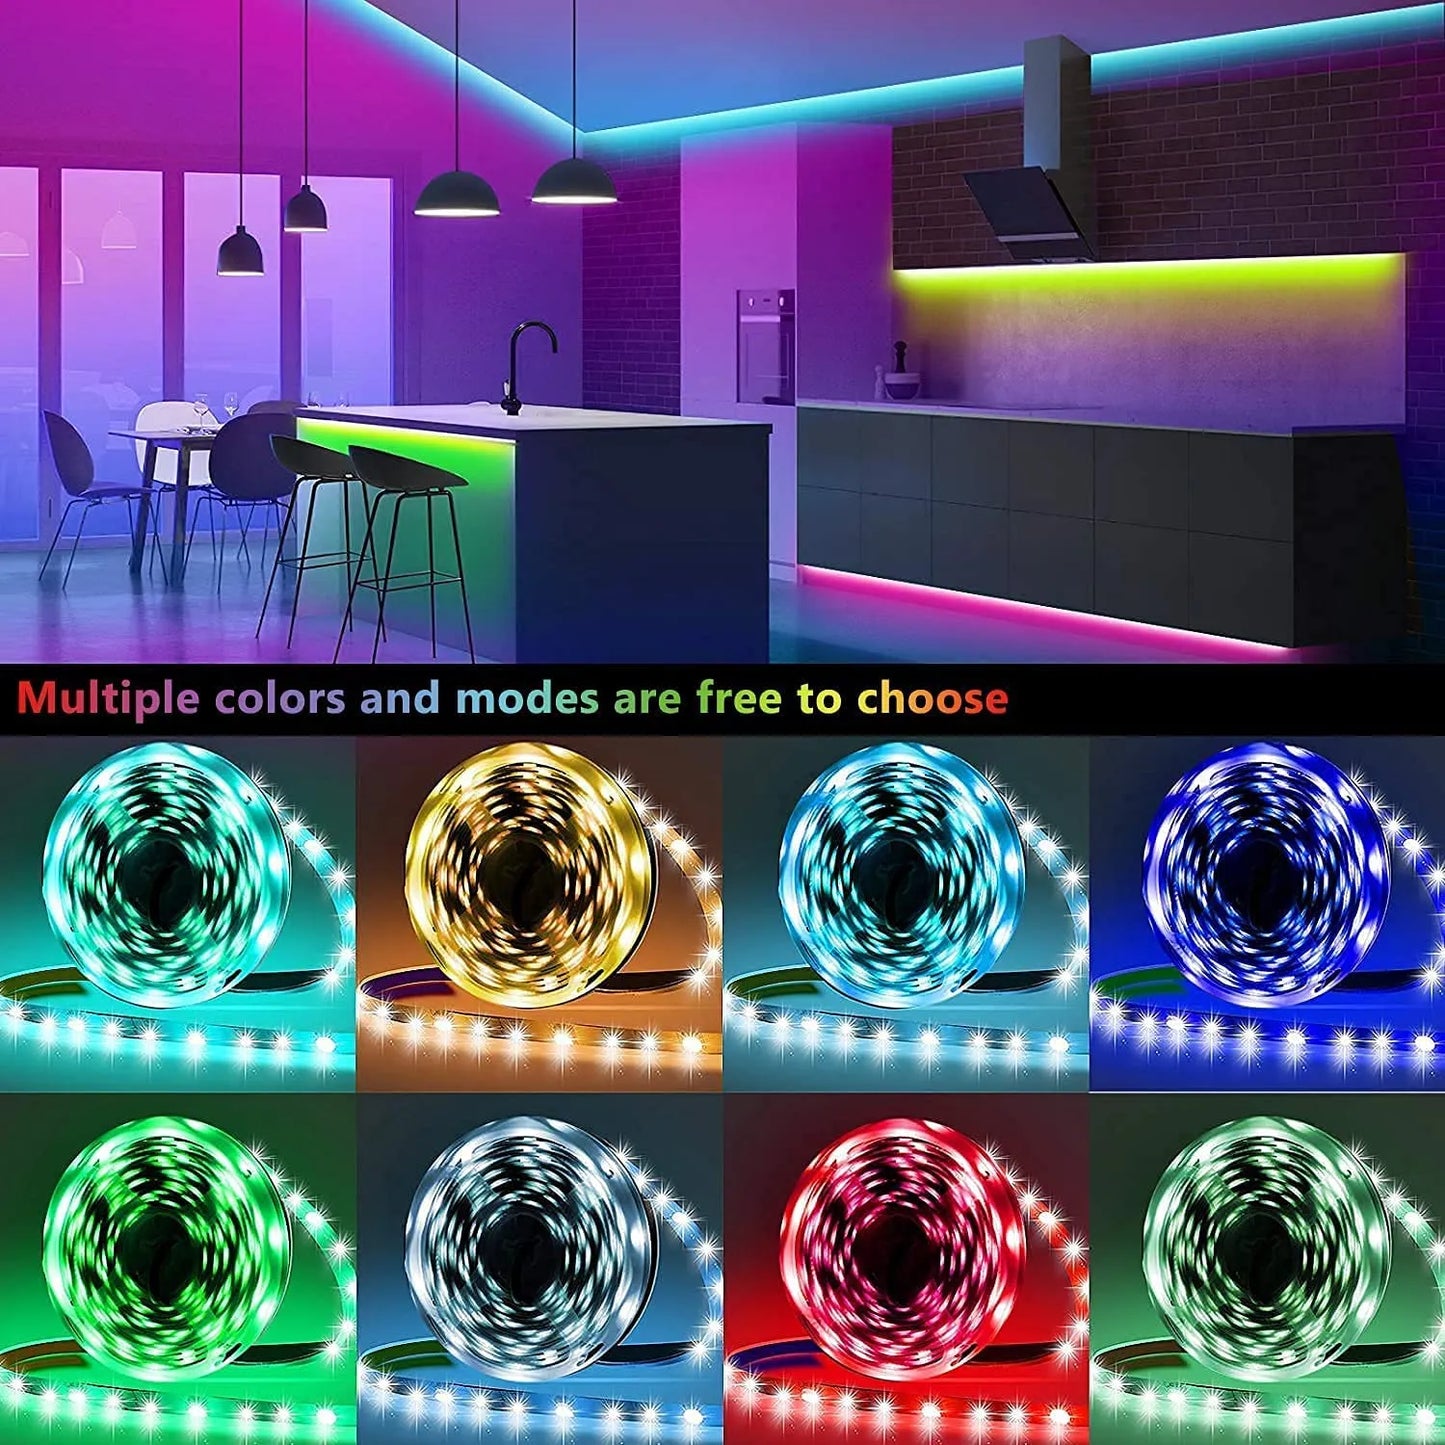 ColorRGB, Led Strip Ligting, 16 Million Colors with App Control